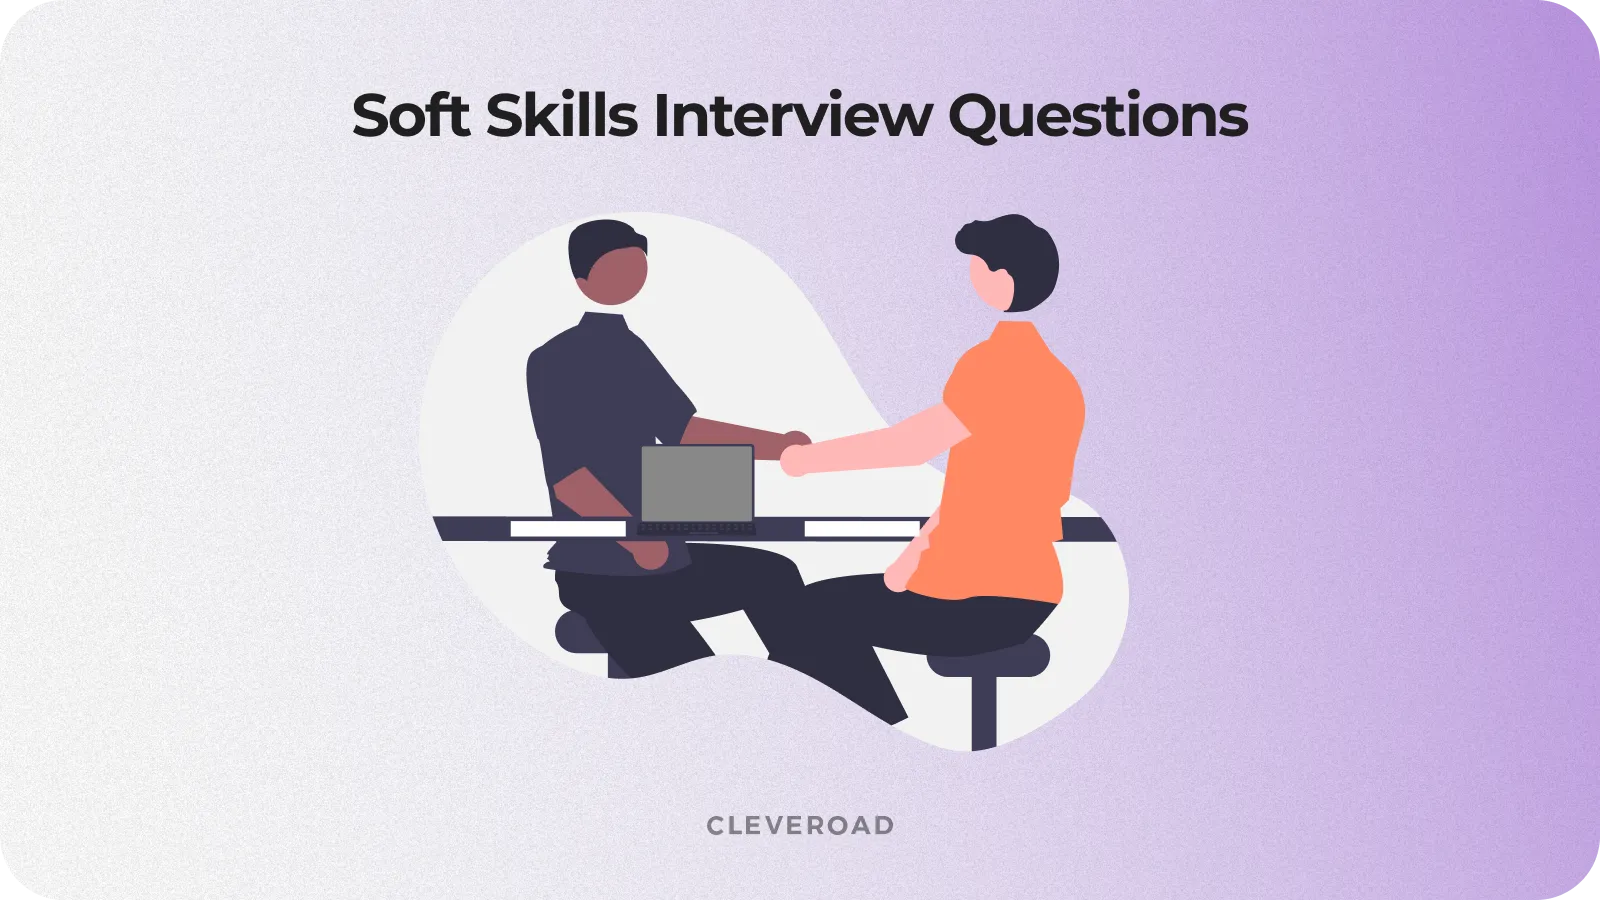 Questions for soft skills testing